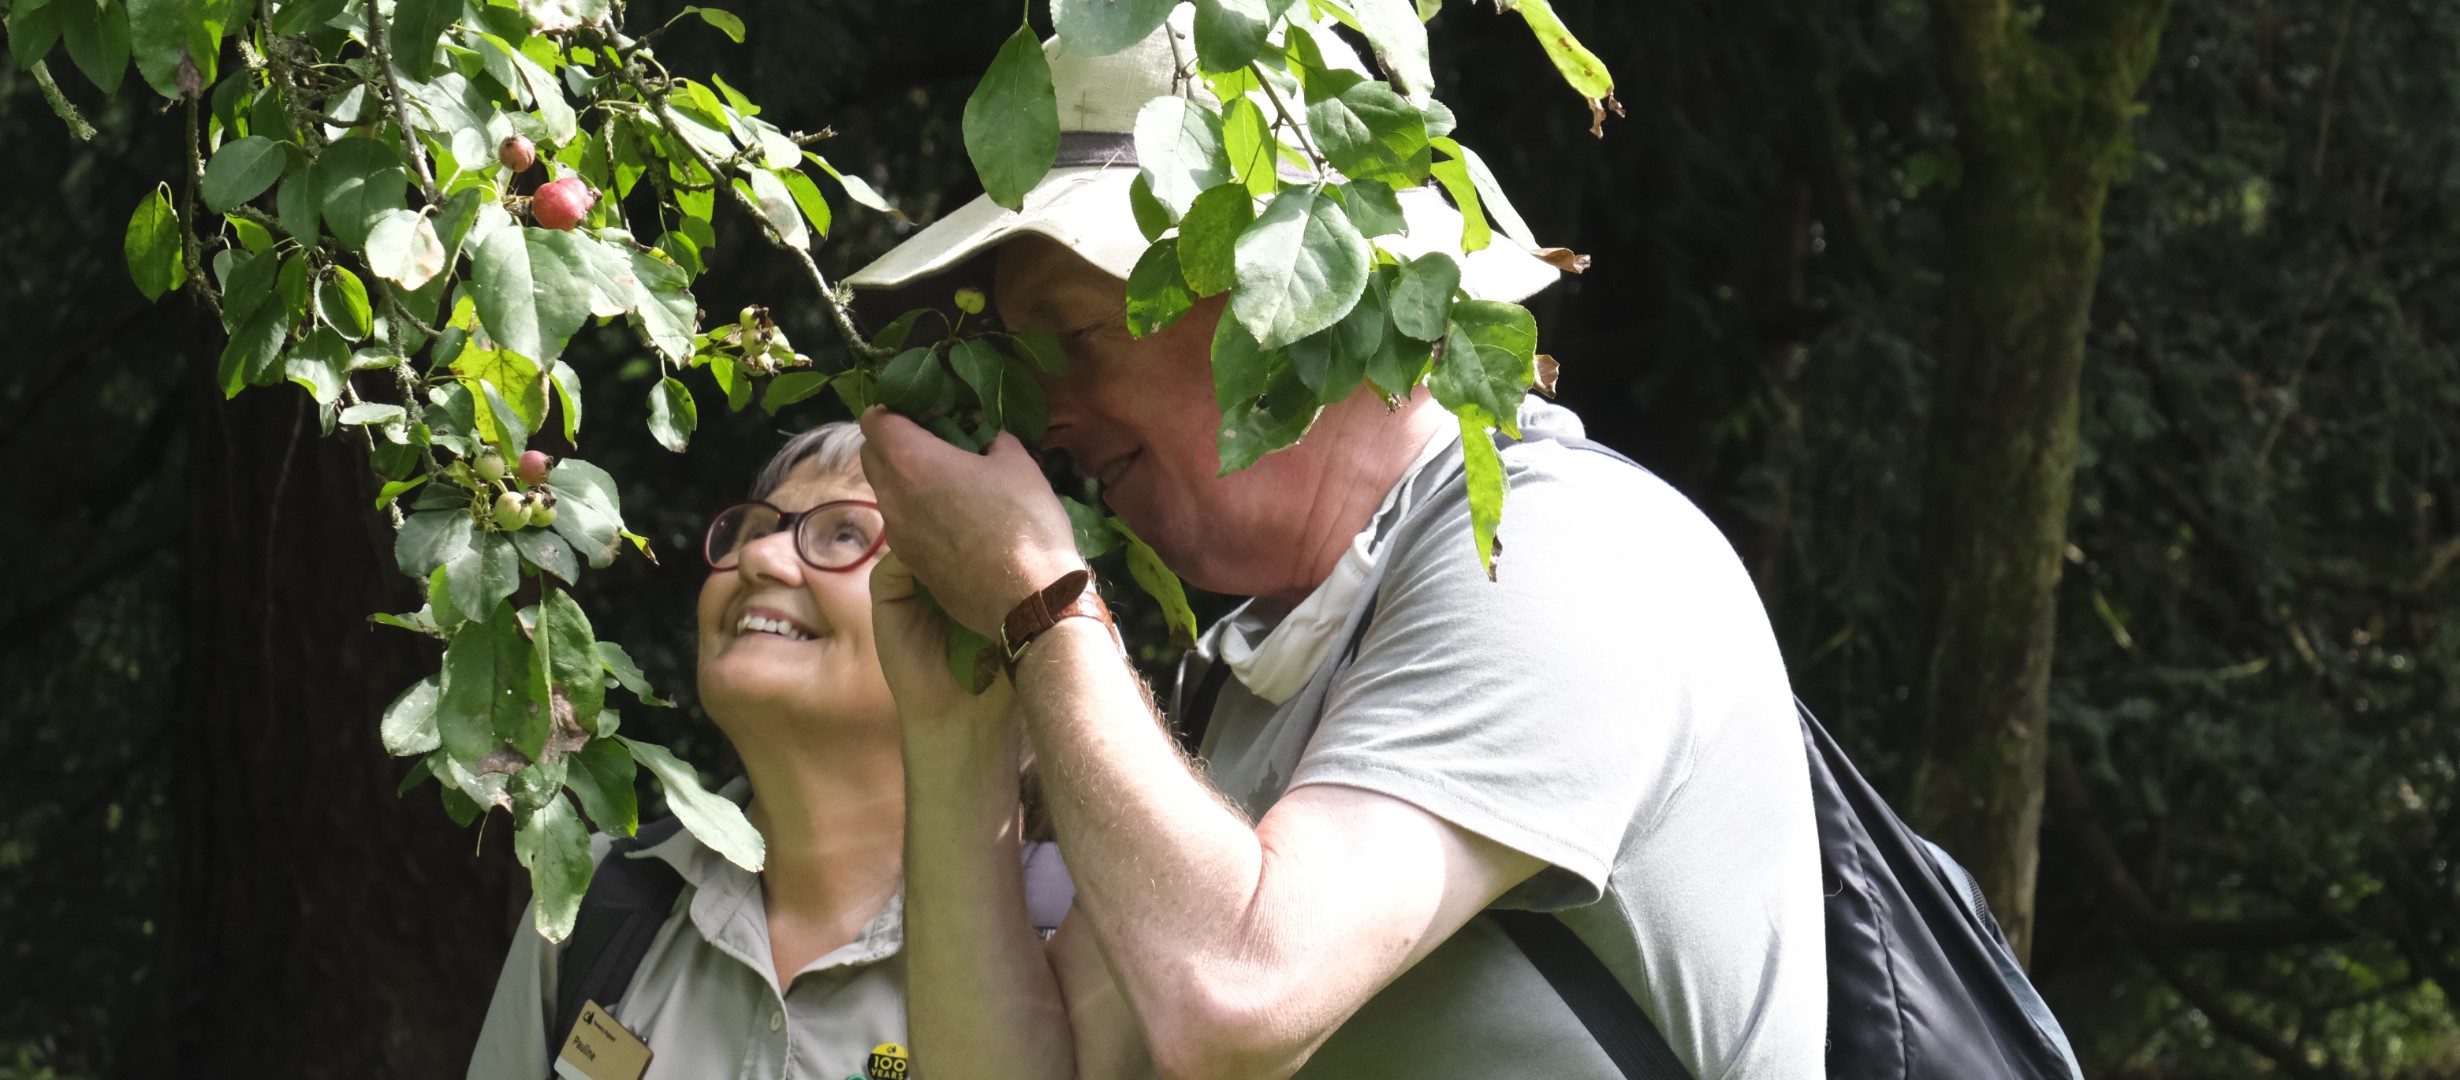 A gentleman brings a branch covered in lush green leaves close to his nose to smell the aroma. A woman by his side looks up joyfully towards the top of the tree.